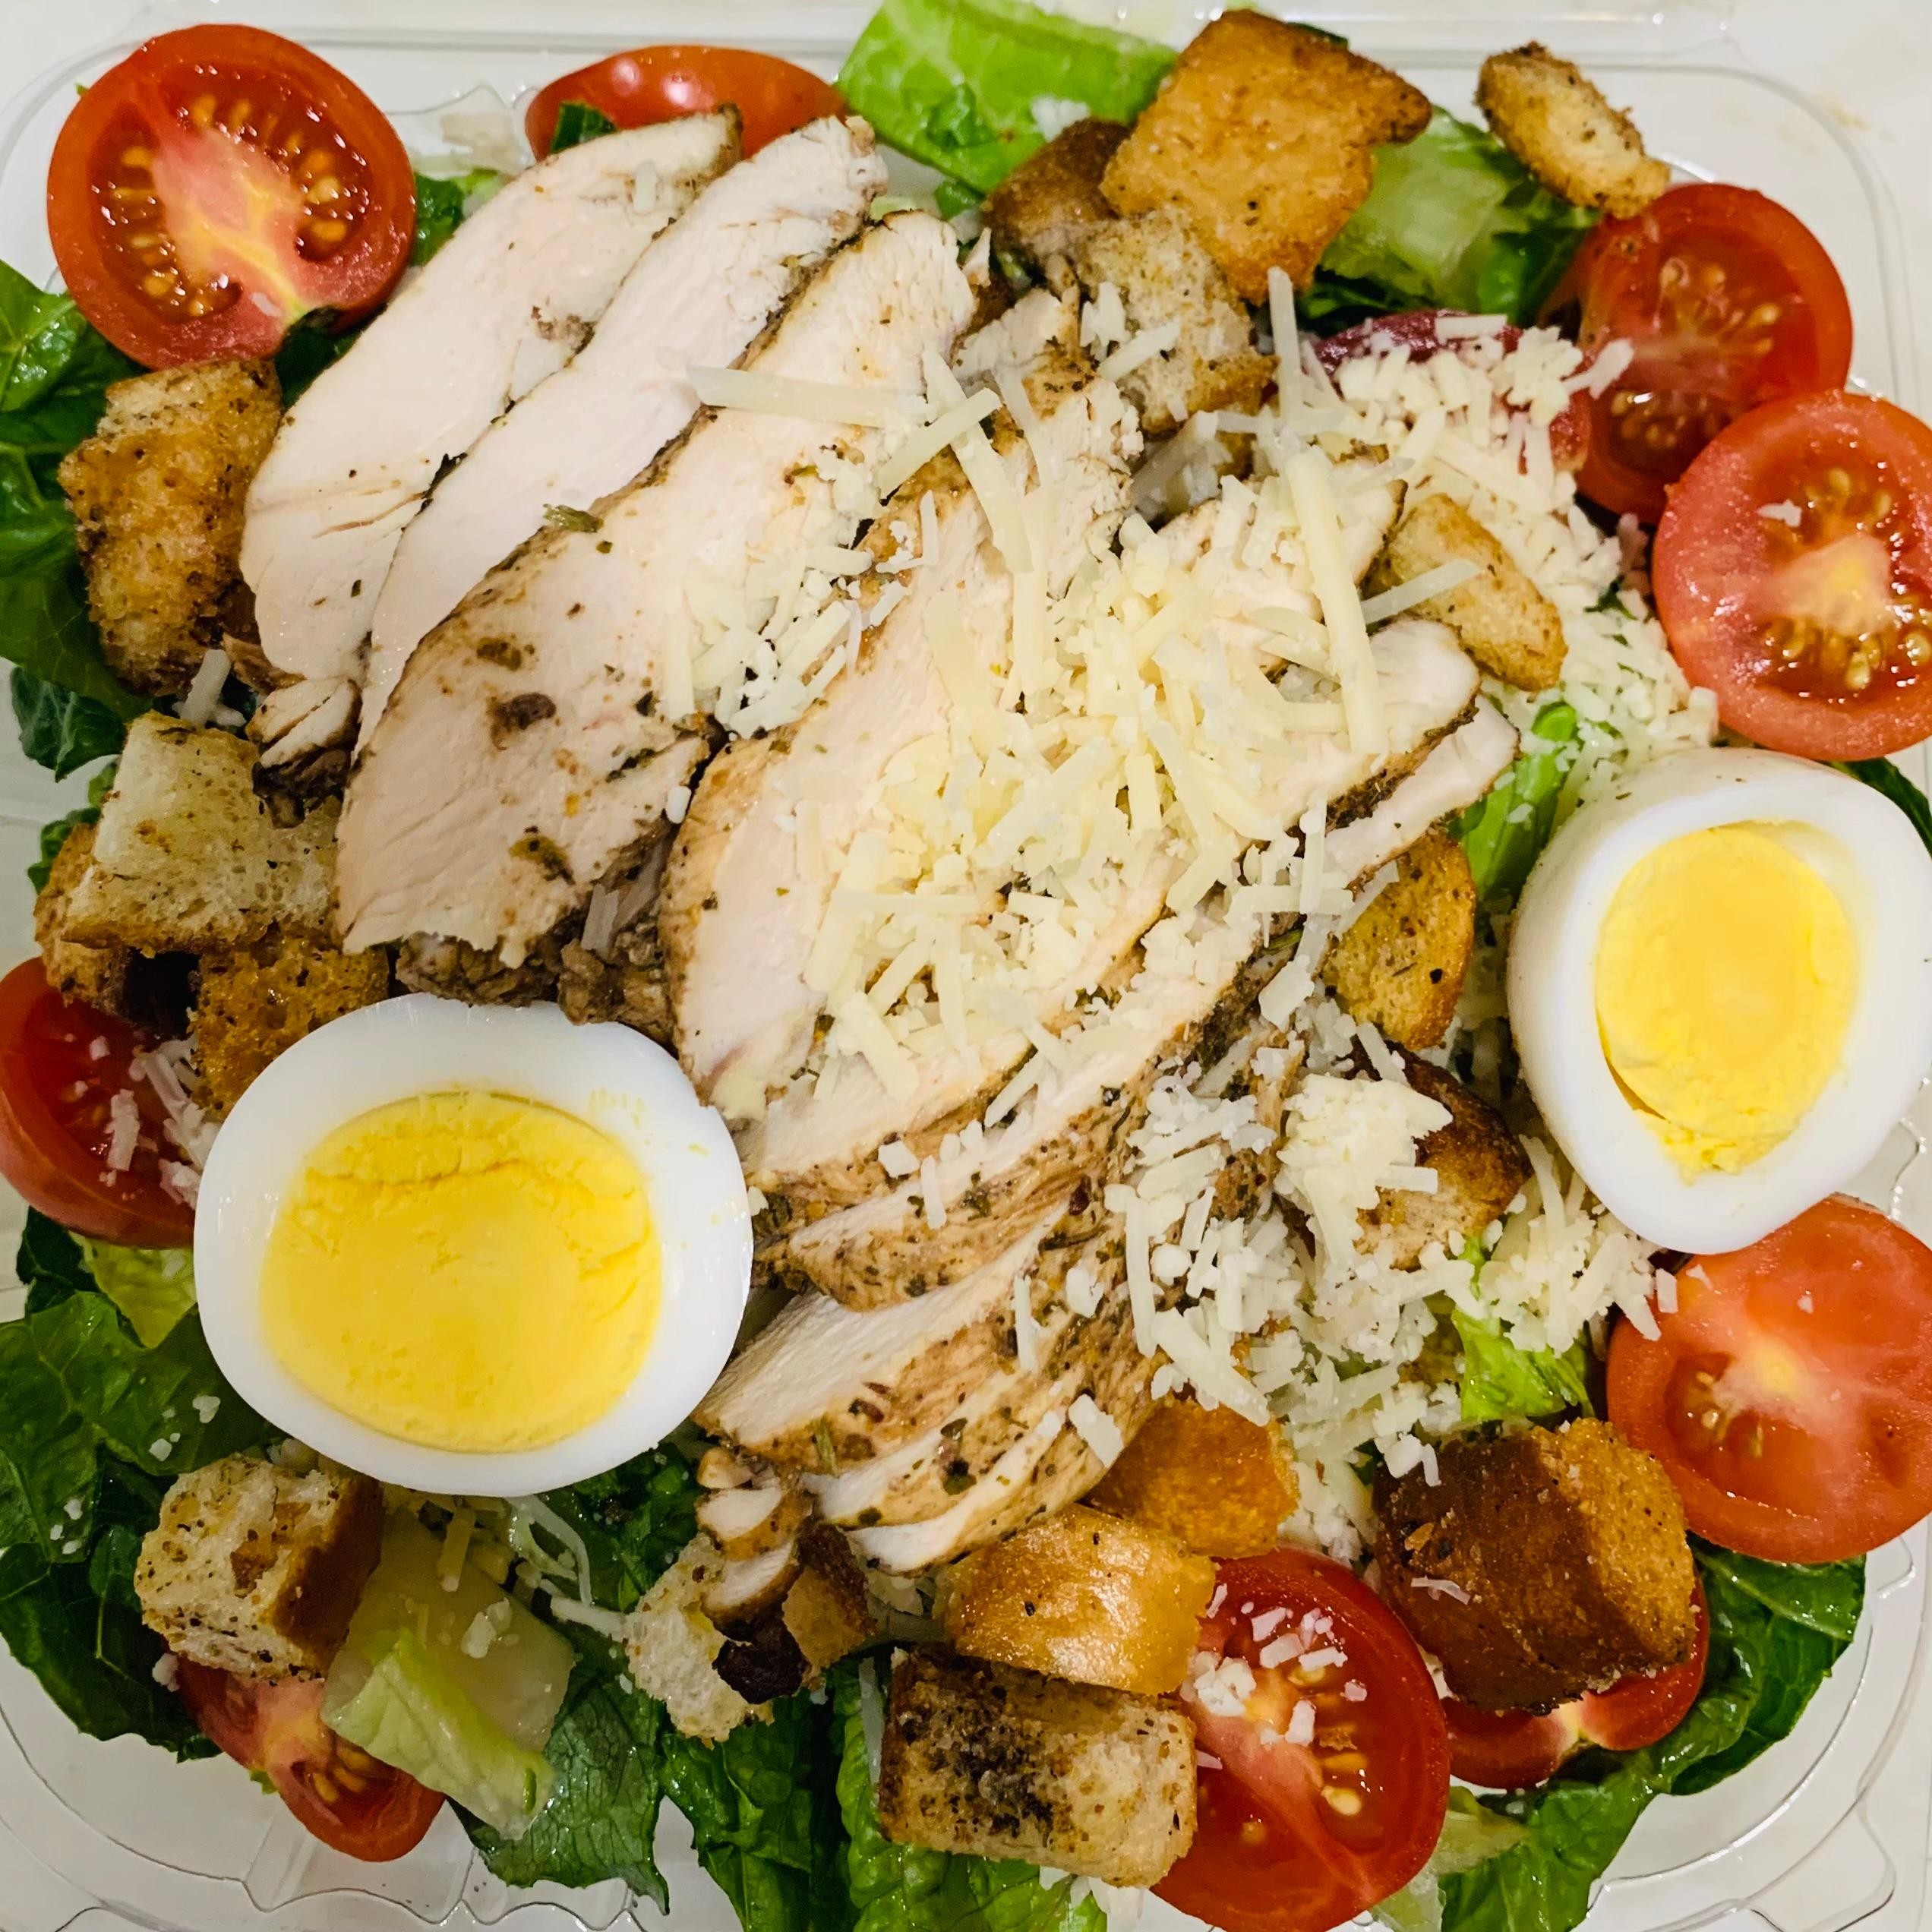 GRILLED CHICKEN CAESAR SALAD (MEAL) - PRICE PER PERSON